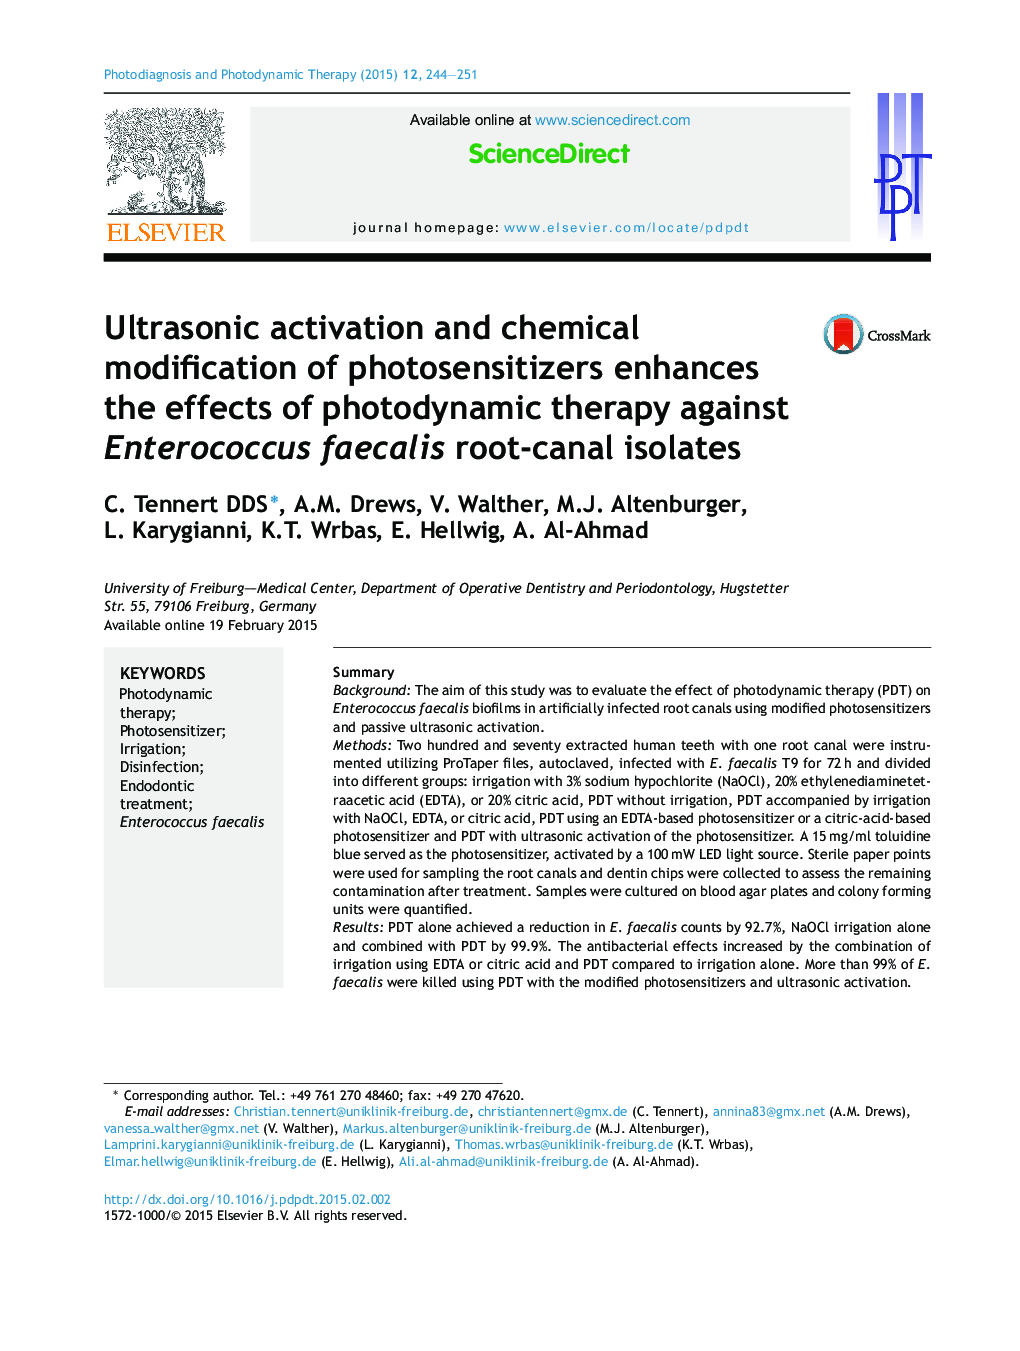 Ultrasonic activation and chemical modification of photosensitizers enhances the effects of photodynamic therapy against Enterococcus faecalis root-canal isolates